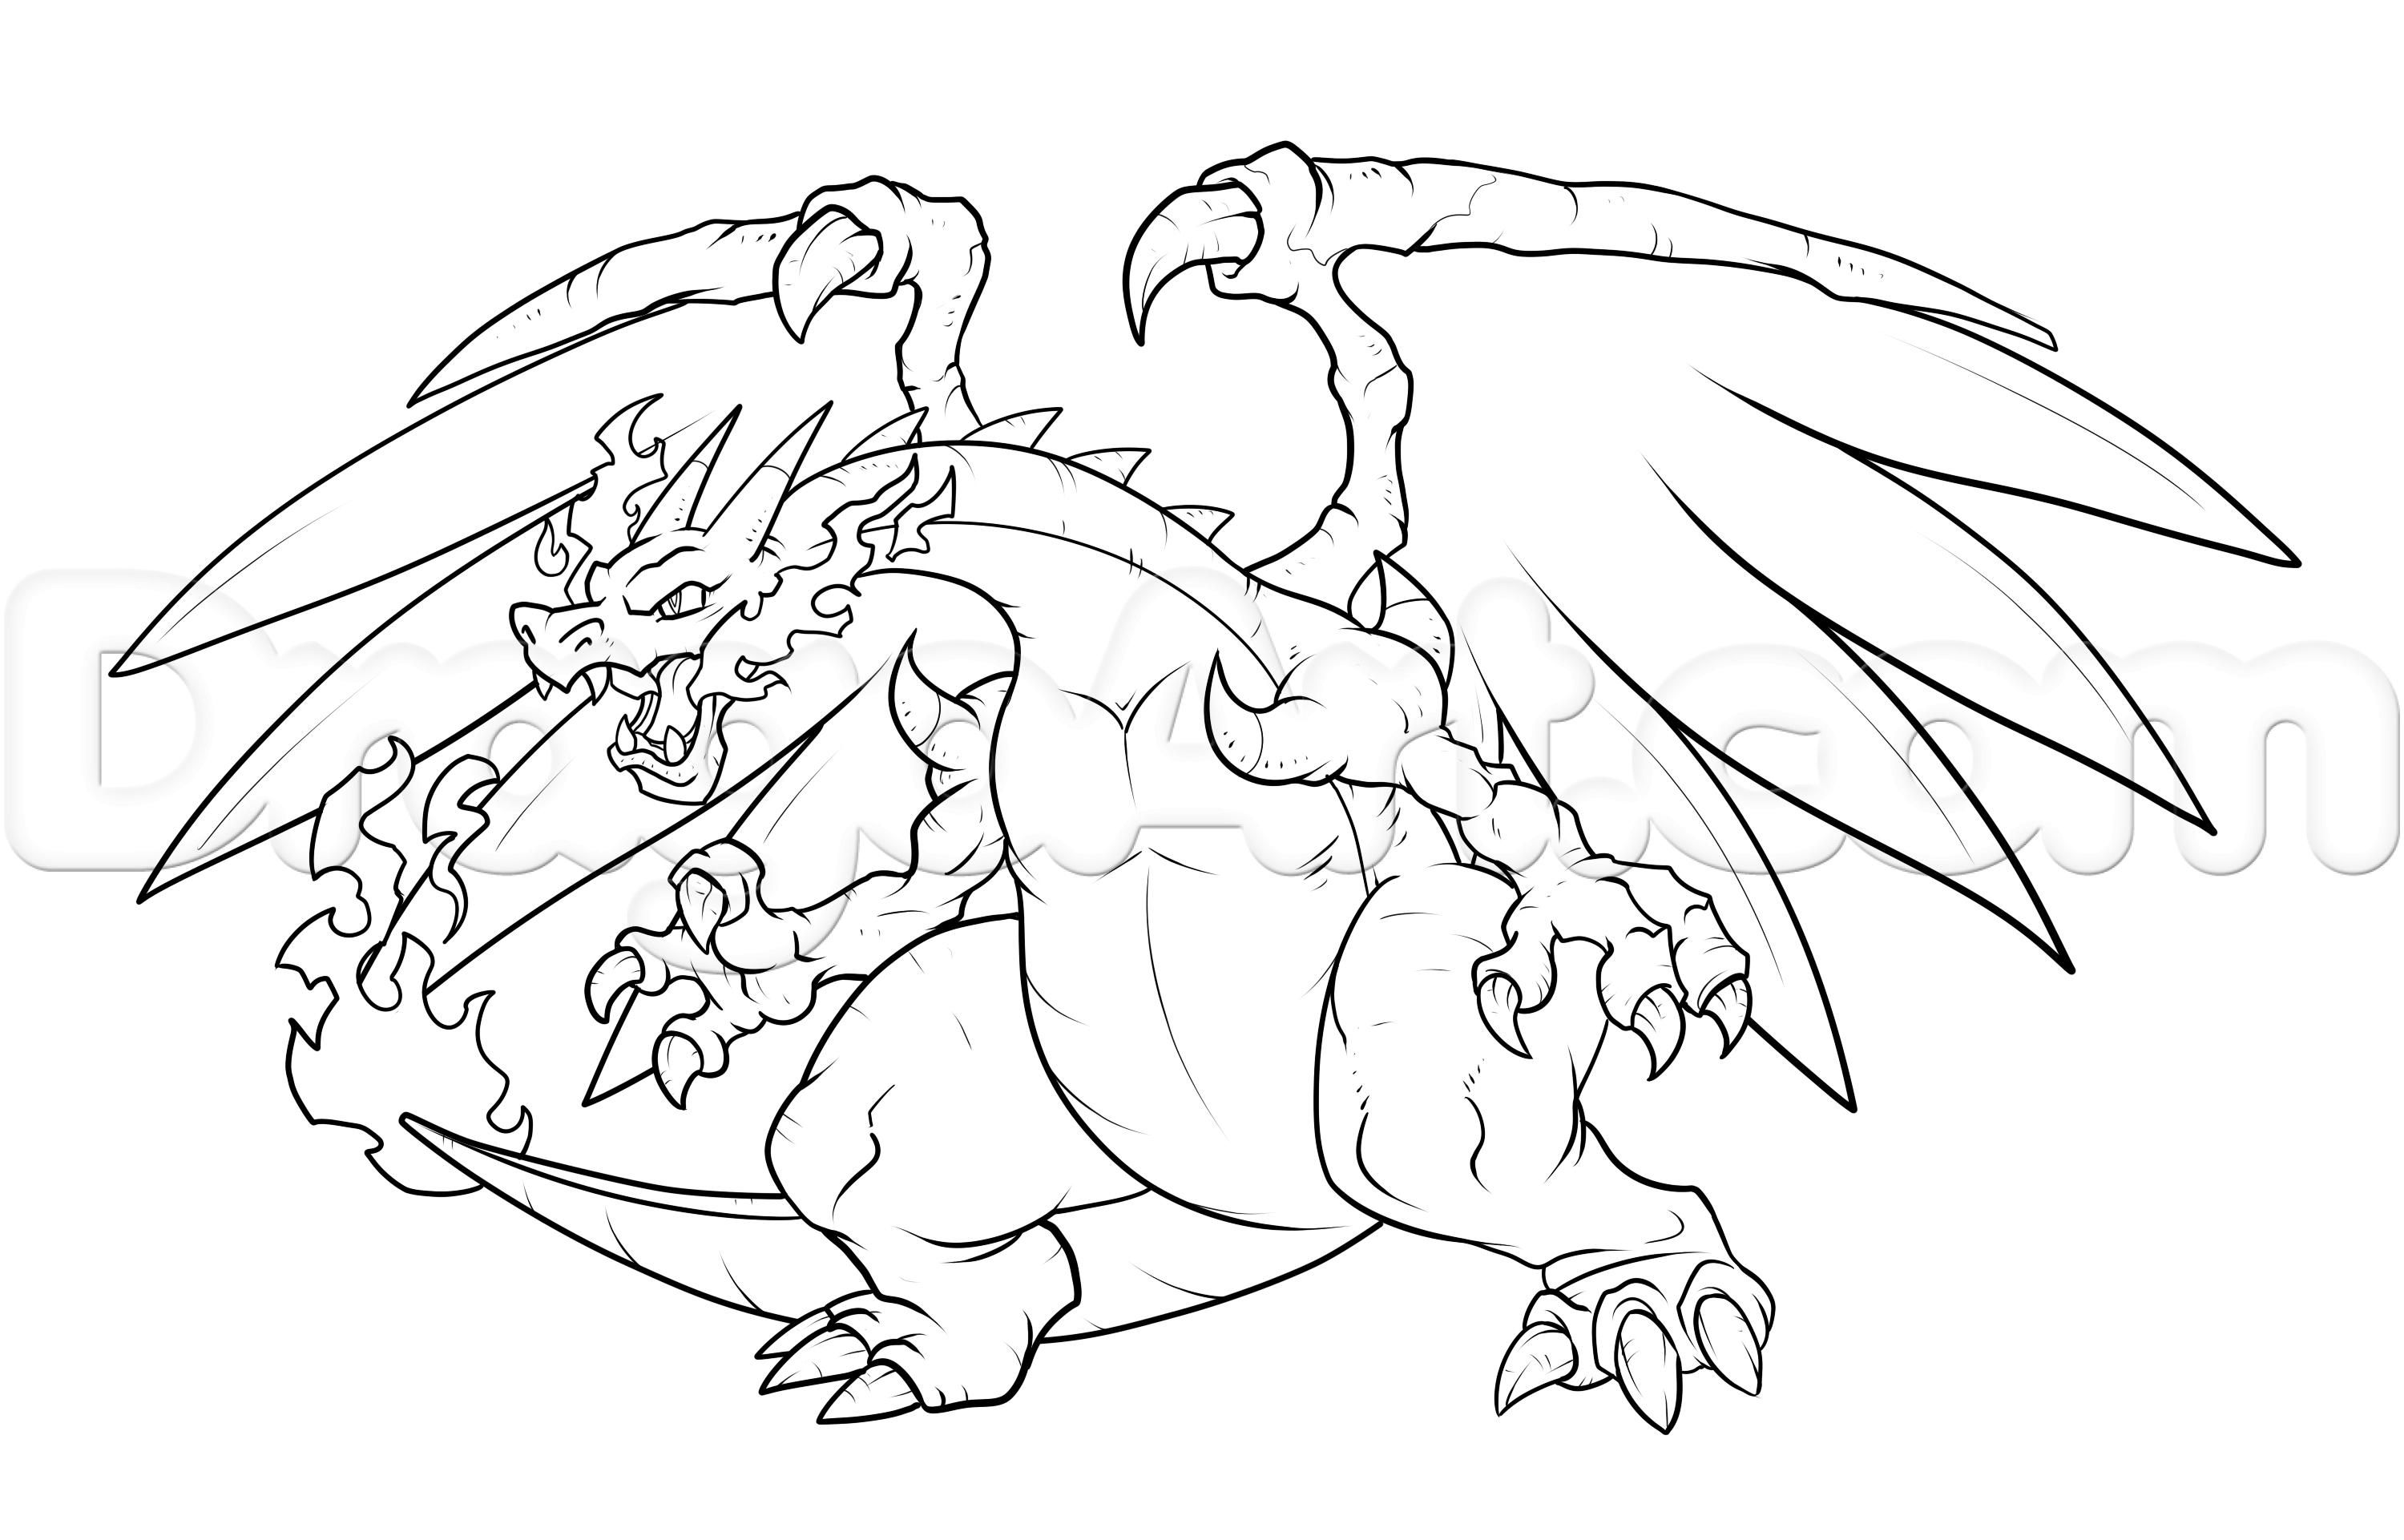 Coloring Pages Of Pokemon Ex - Coloring Page